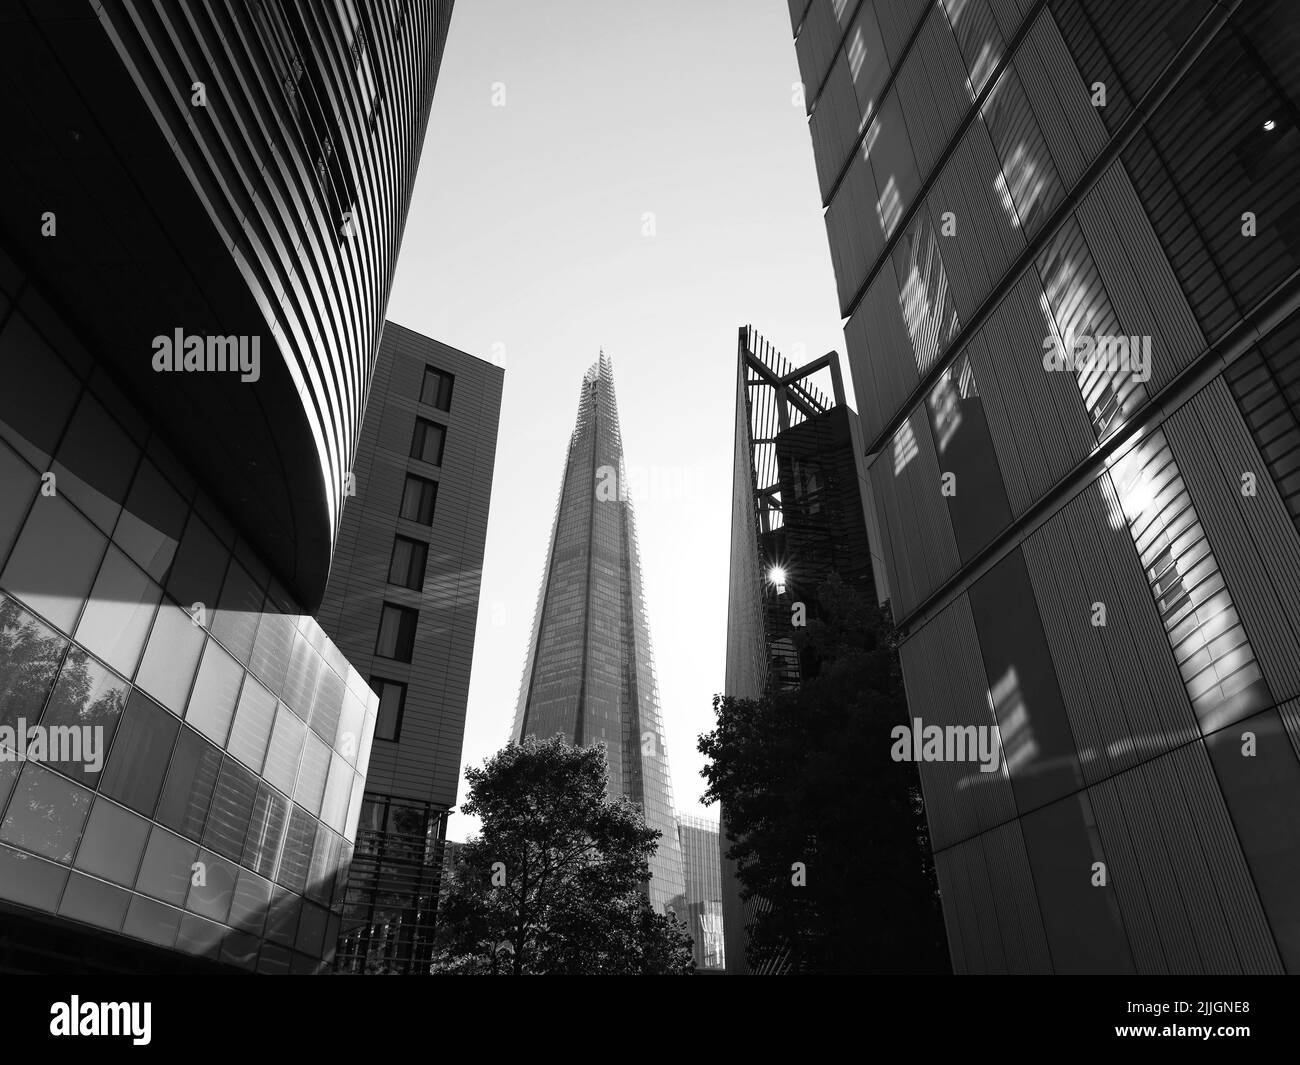 London, Greater London, England, June 22 2022: Looking through buildings on the south bank towards The Shard Skyscraper. Monochrome Stock Photo